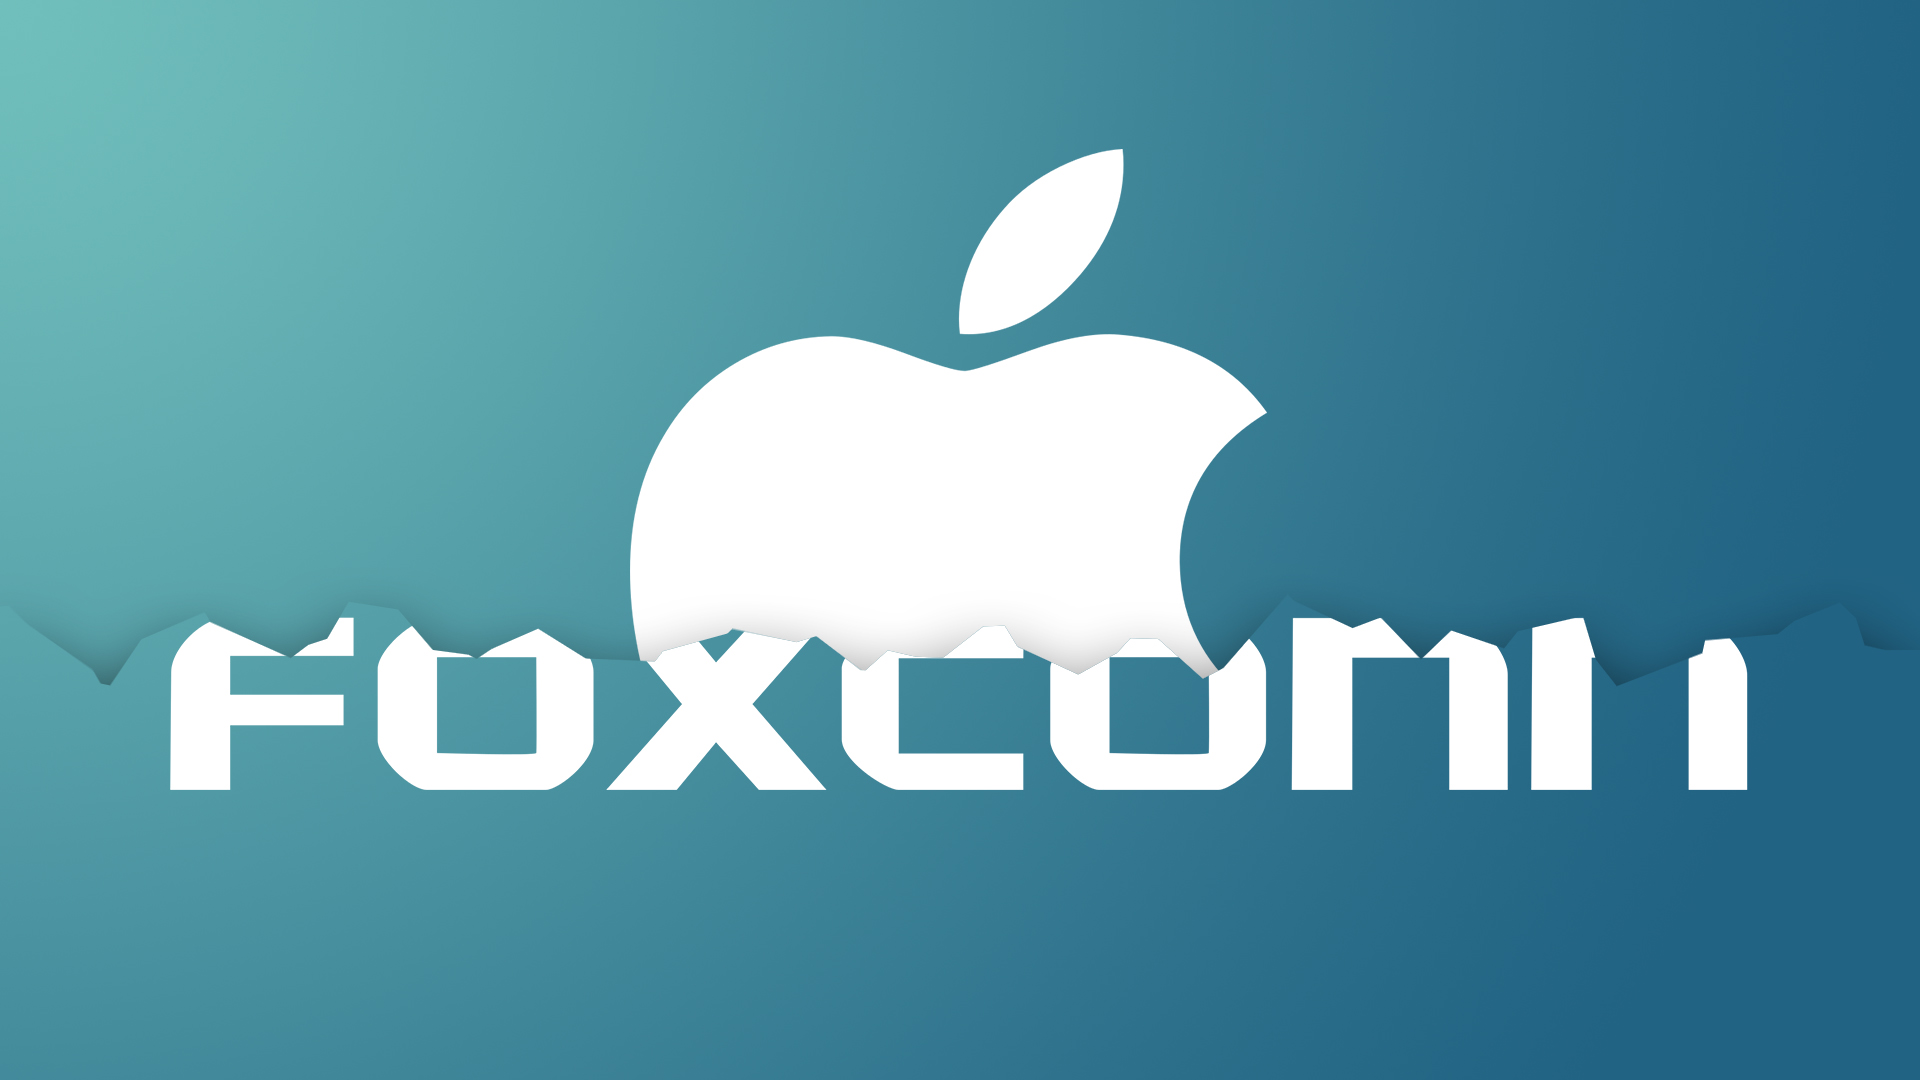 iPhone Maker Foxconn Restarts Production in Shenzhen As Lockdown Partially Lifts